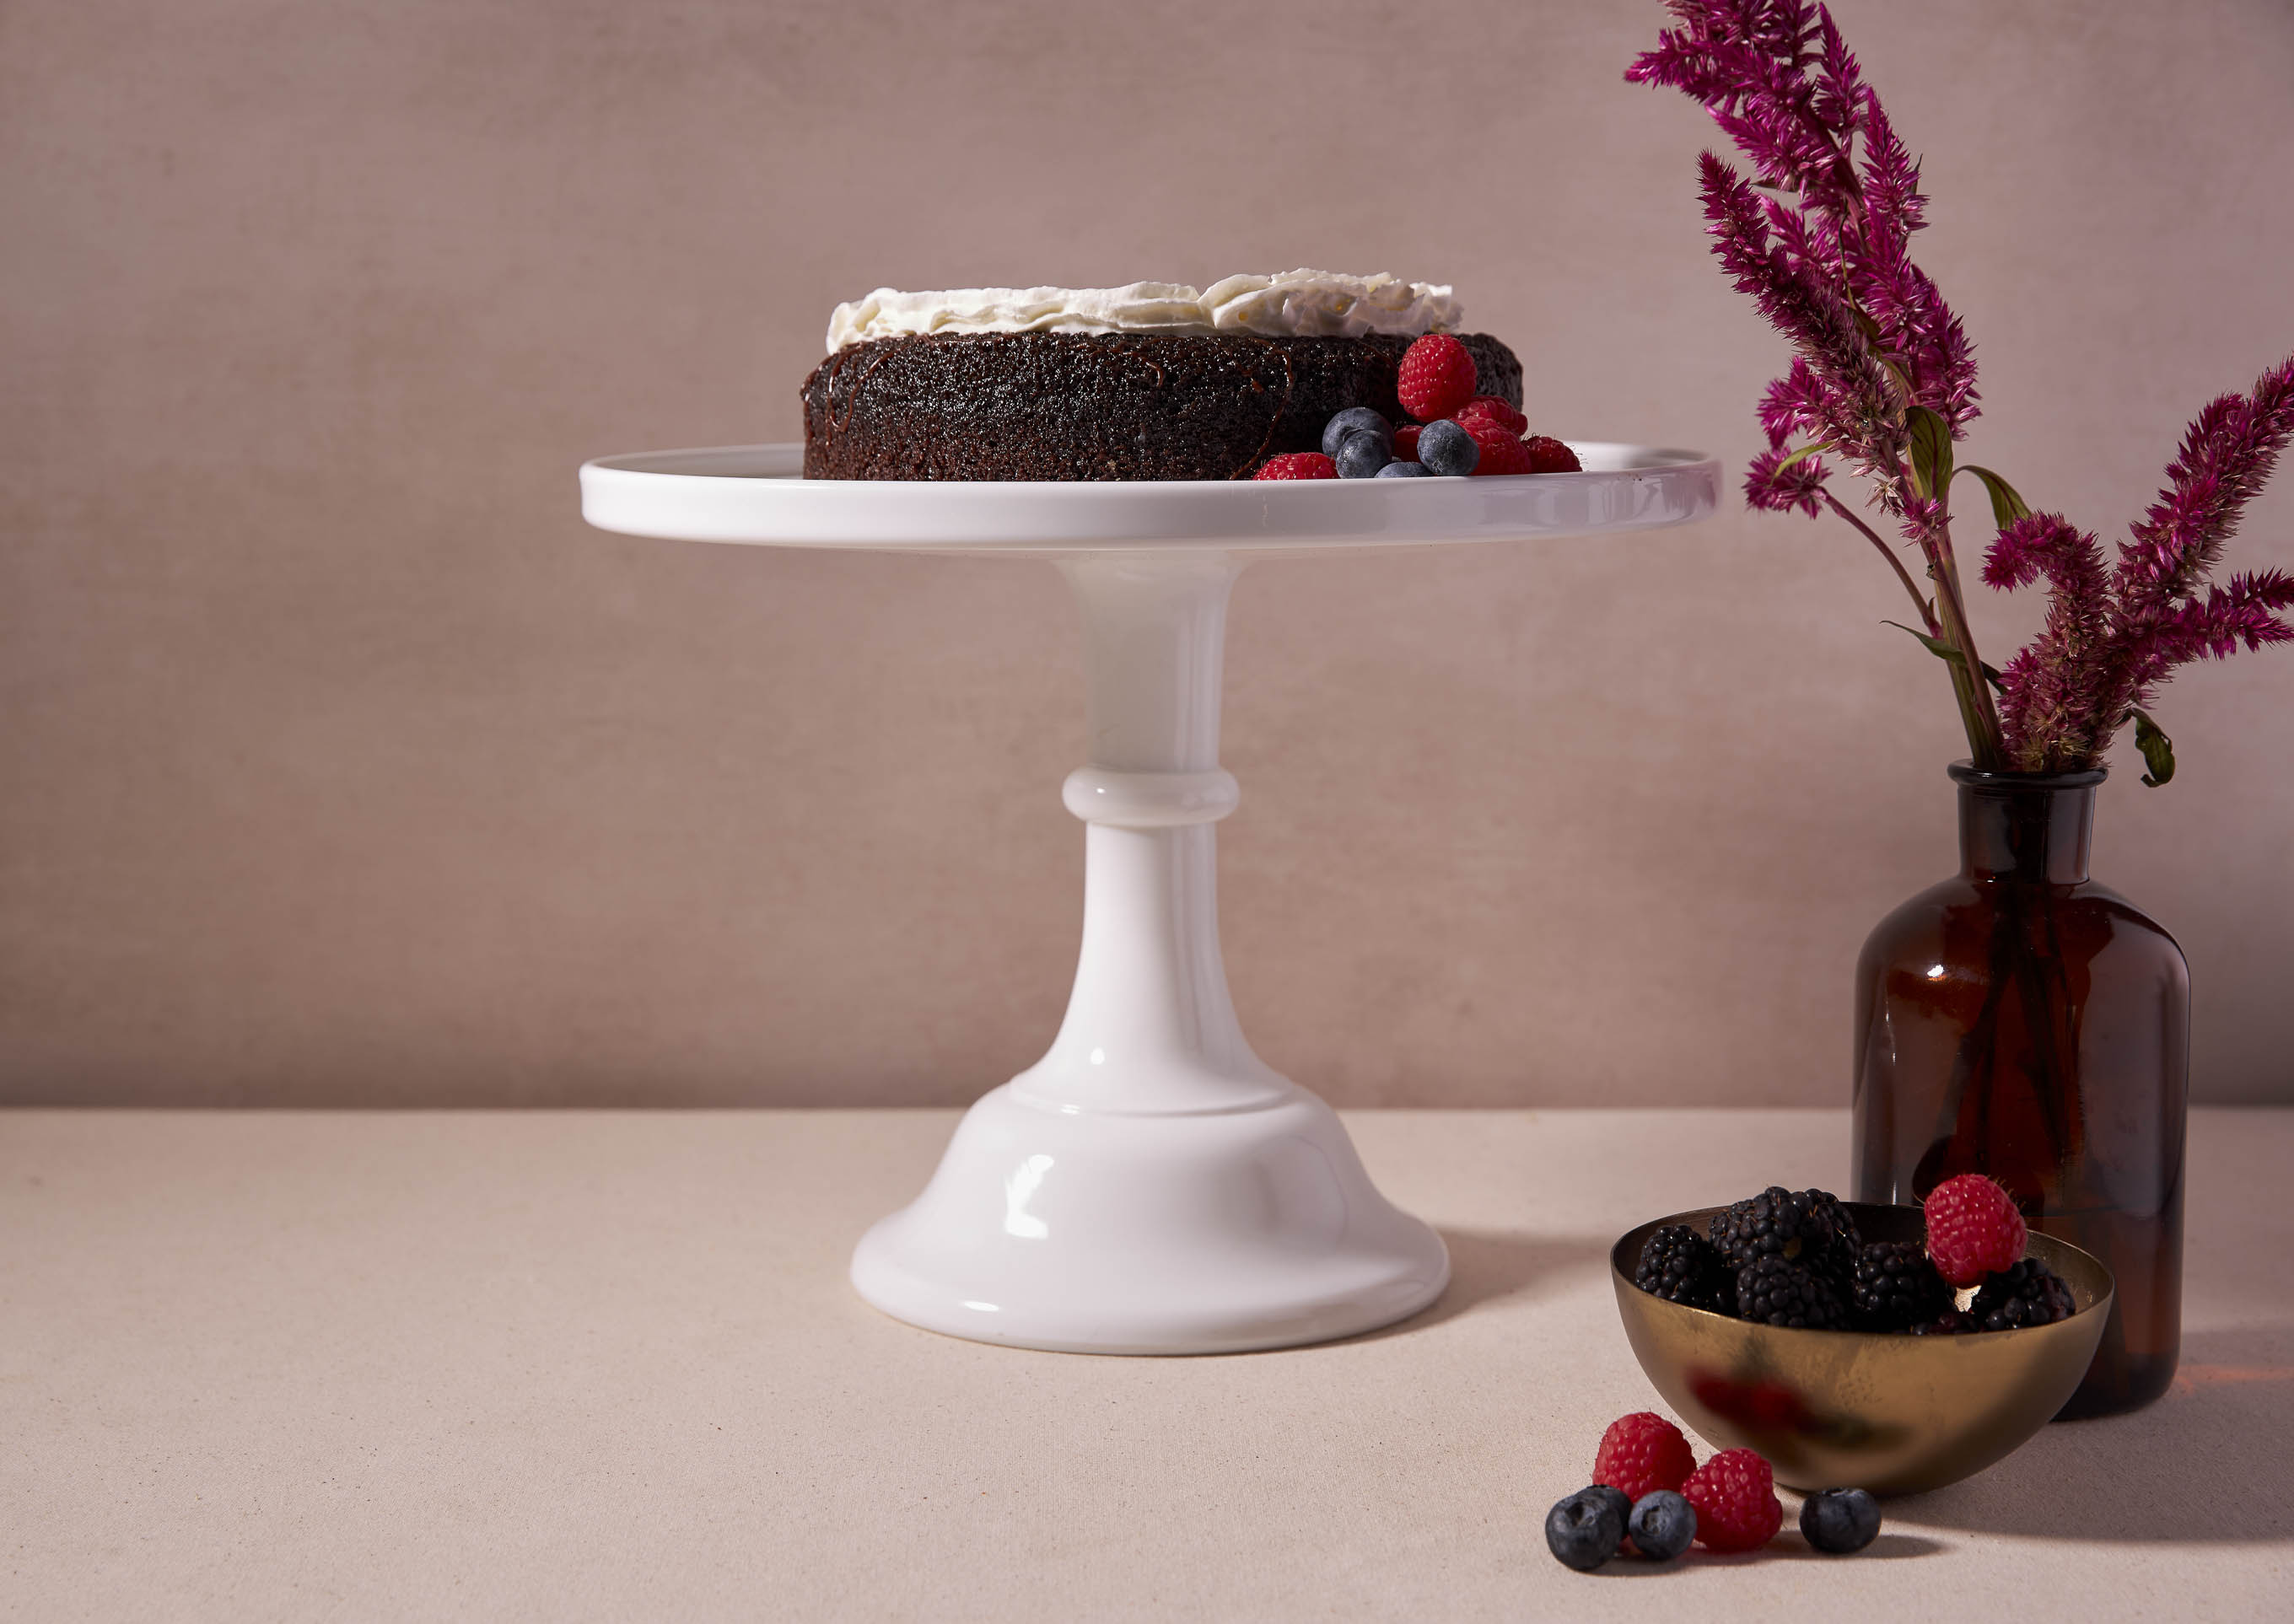 Shopping for Cake Stands - The New York Times